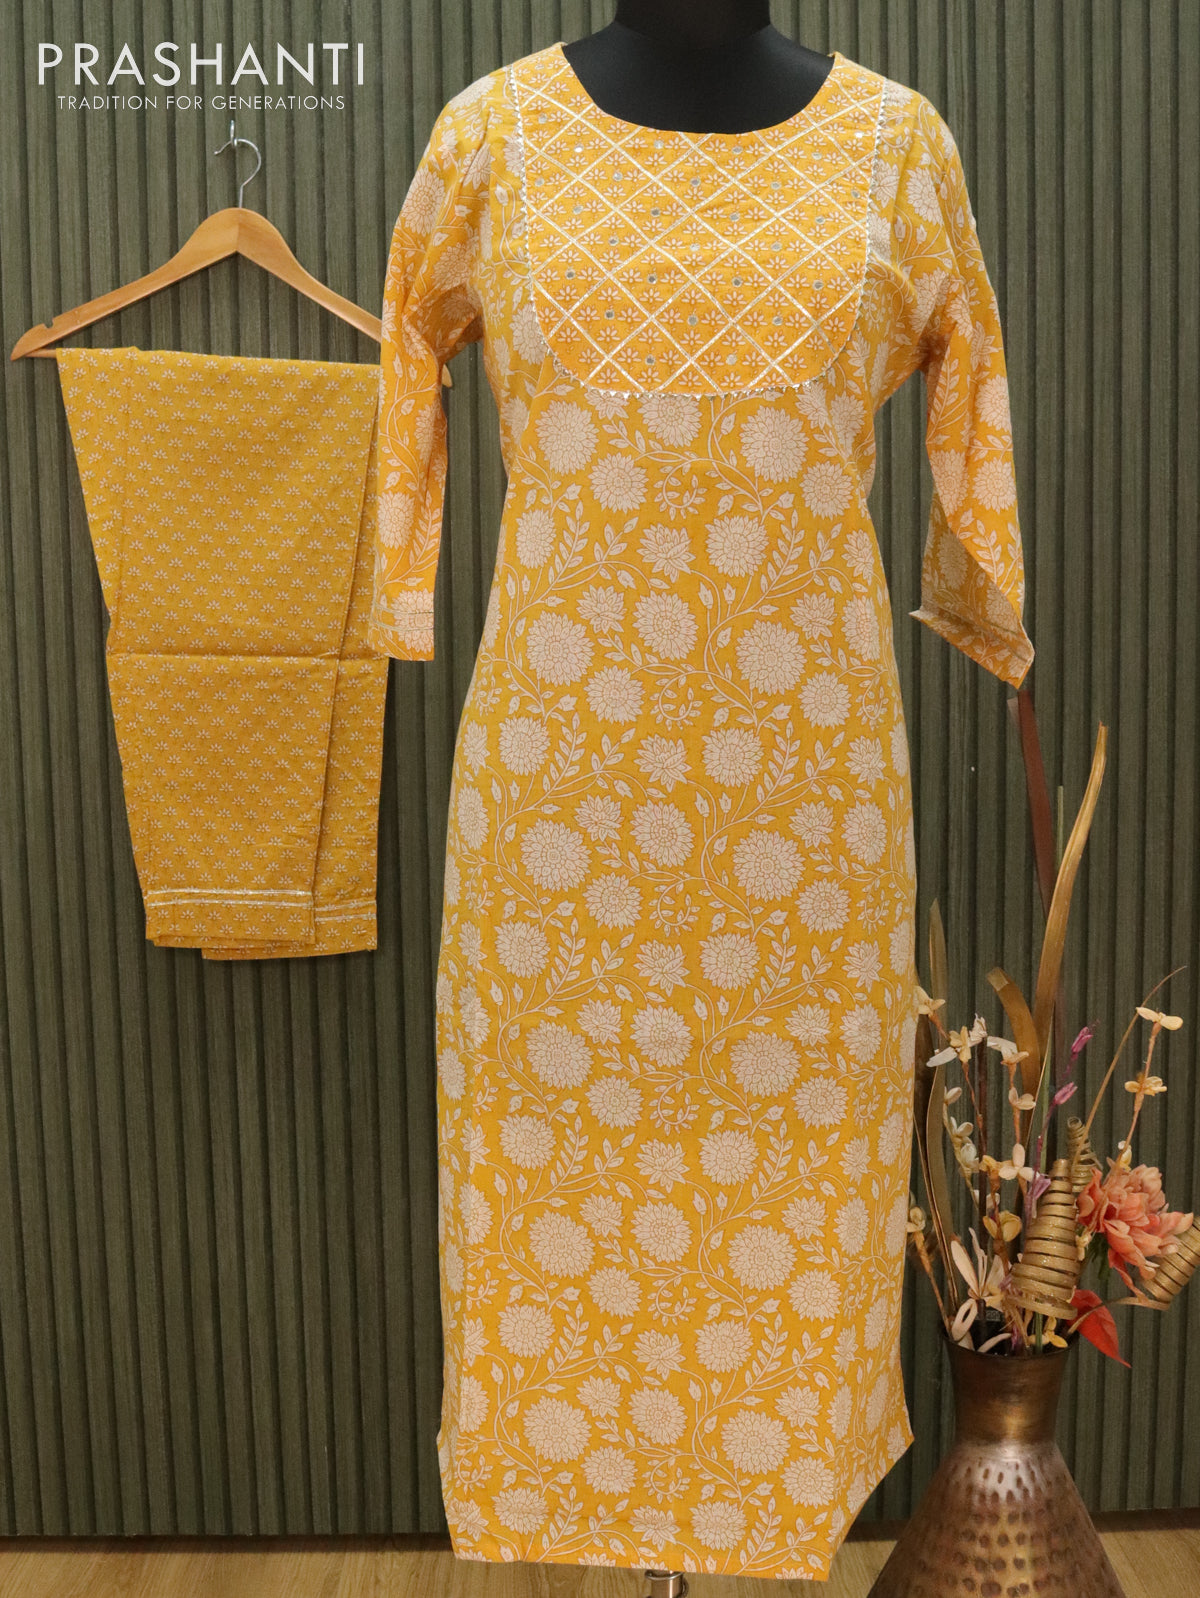 Cotton readymade kurti yellow with allover floral prints & mirror work gotapatti lace neck pattern and straight cut pant